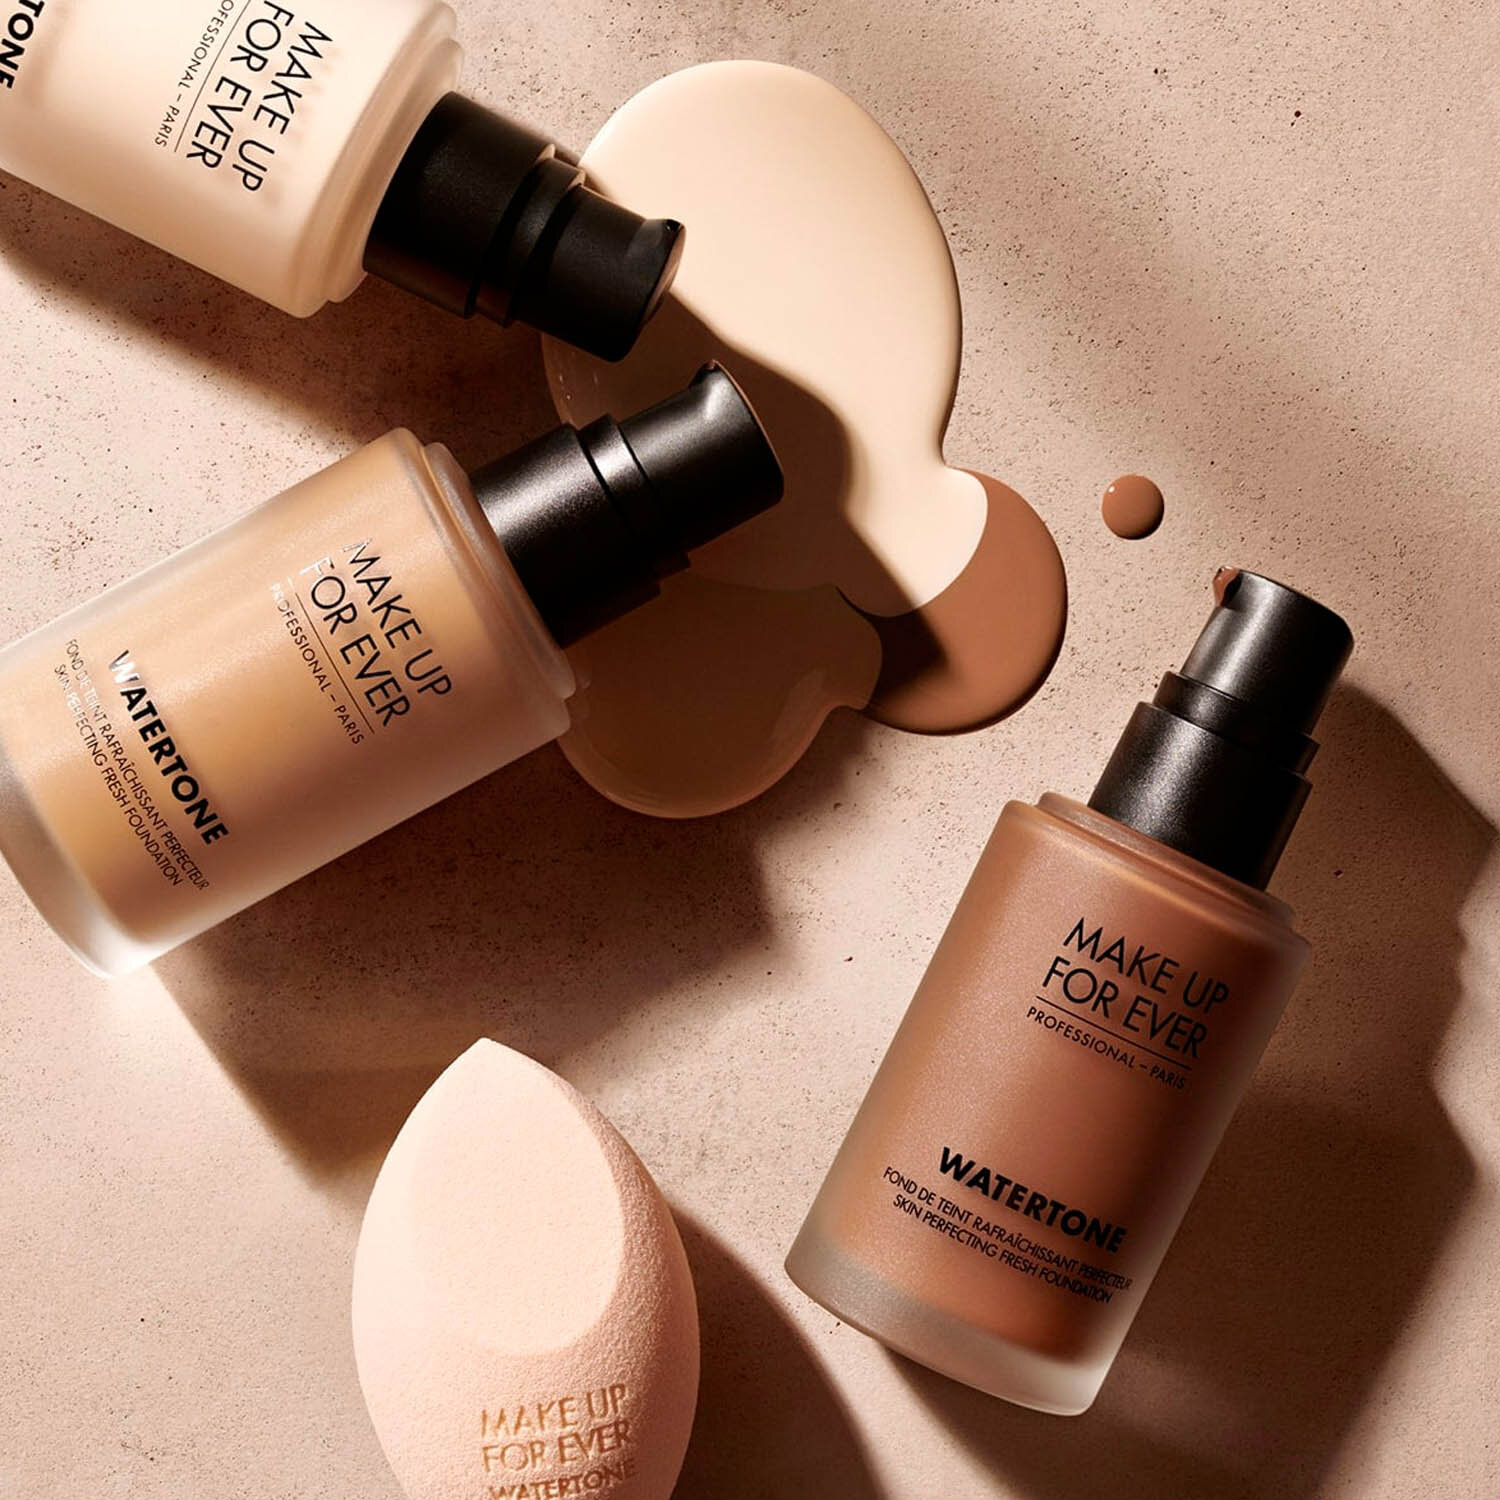 MAKE UP FOR EVER Watertone Skin-Perfecting Fresh Foundation Skin Tint Ambient